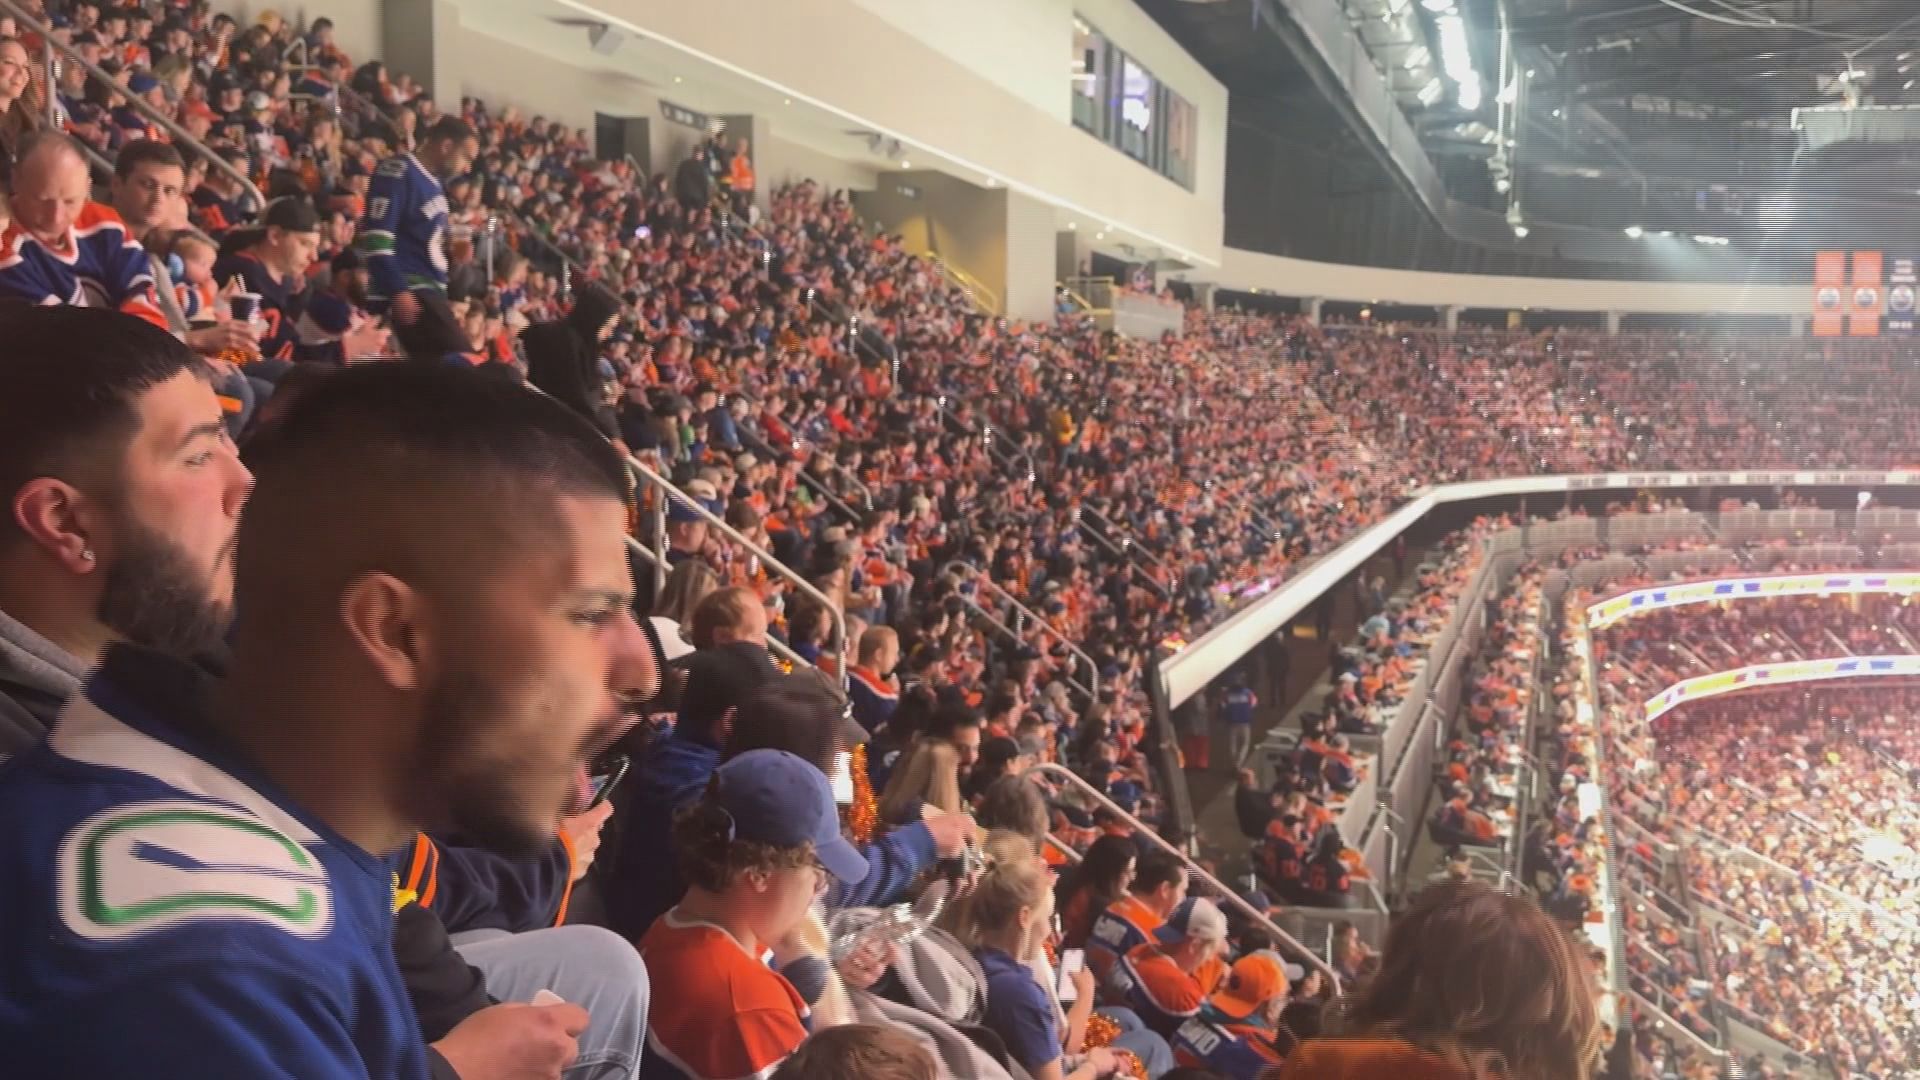 Vancouver Canucks superfan attends every game during playoffs. Yes, every one